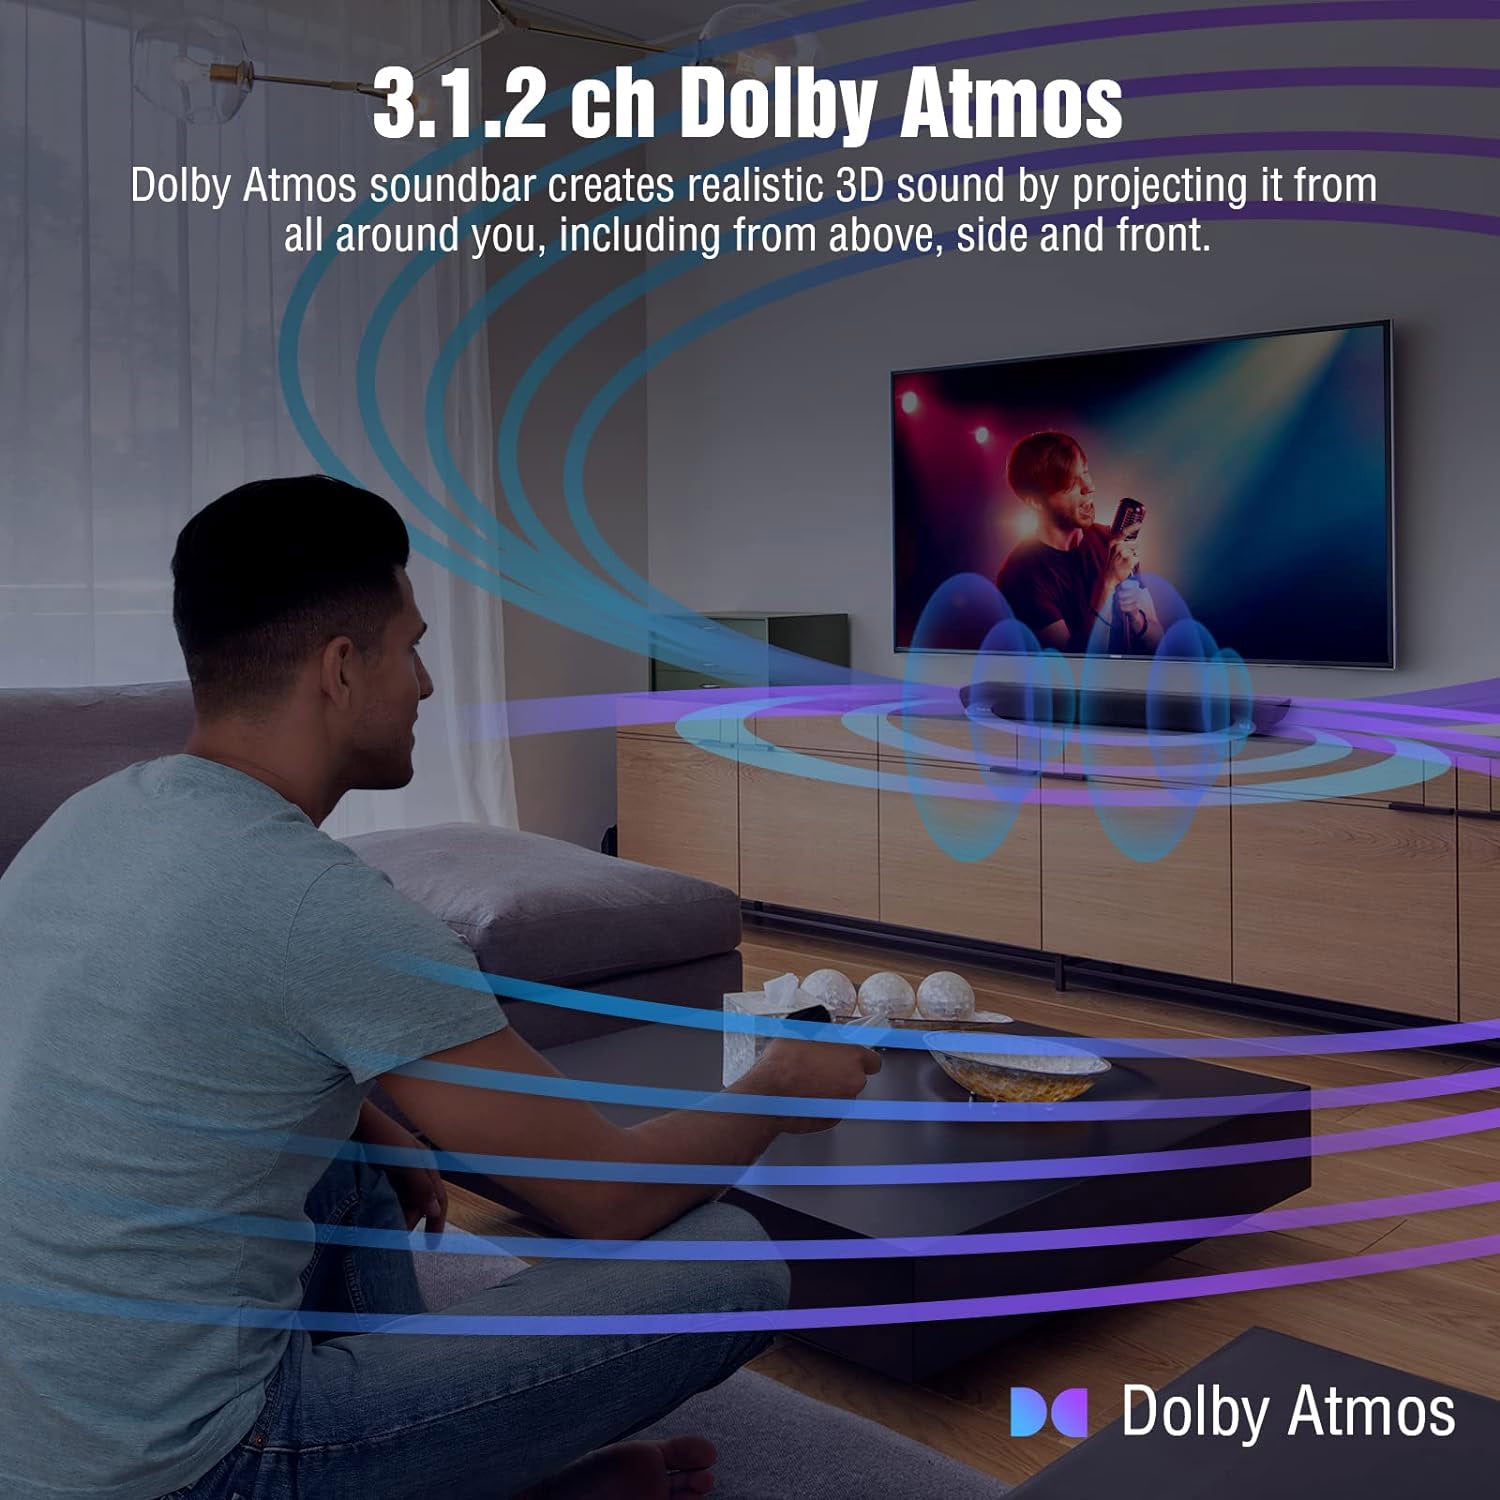 3.1.2ch Dolby Atmos tv sound bar brings the movie theater experience into your home and creates realistic 3D surround sound